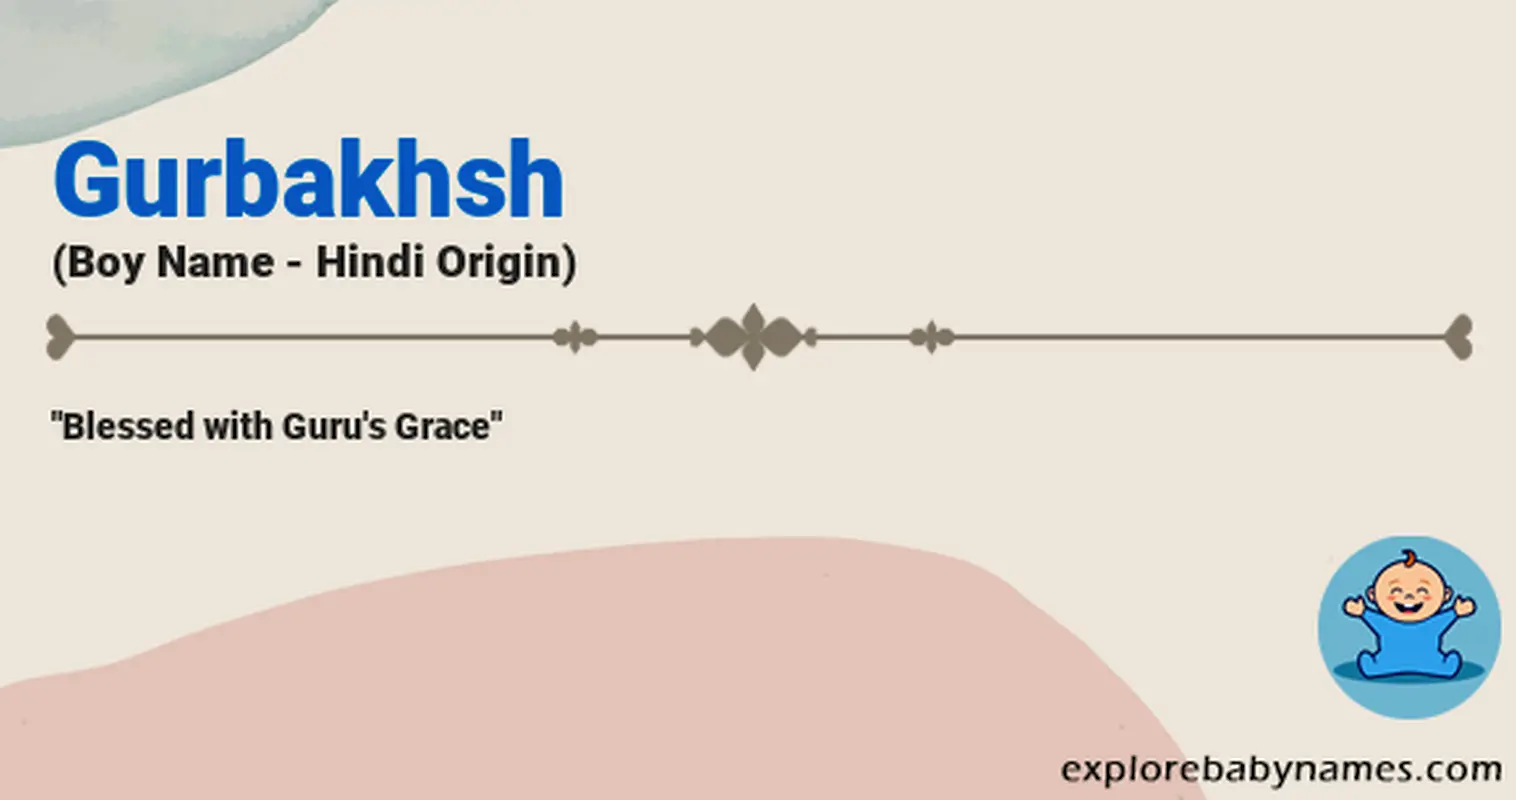 Meaning of Gurbakhsh